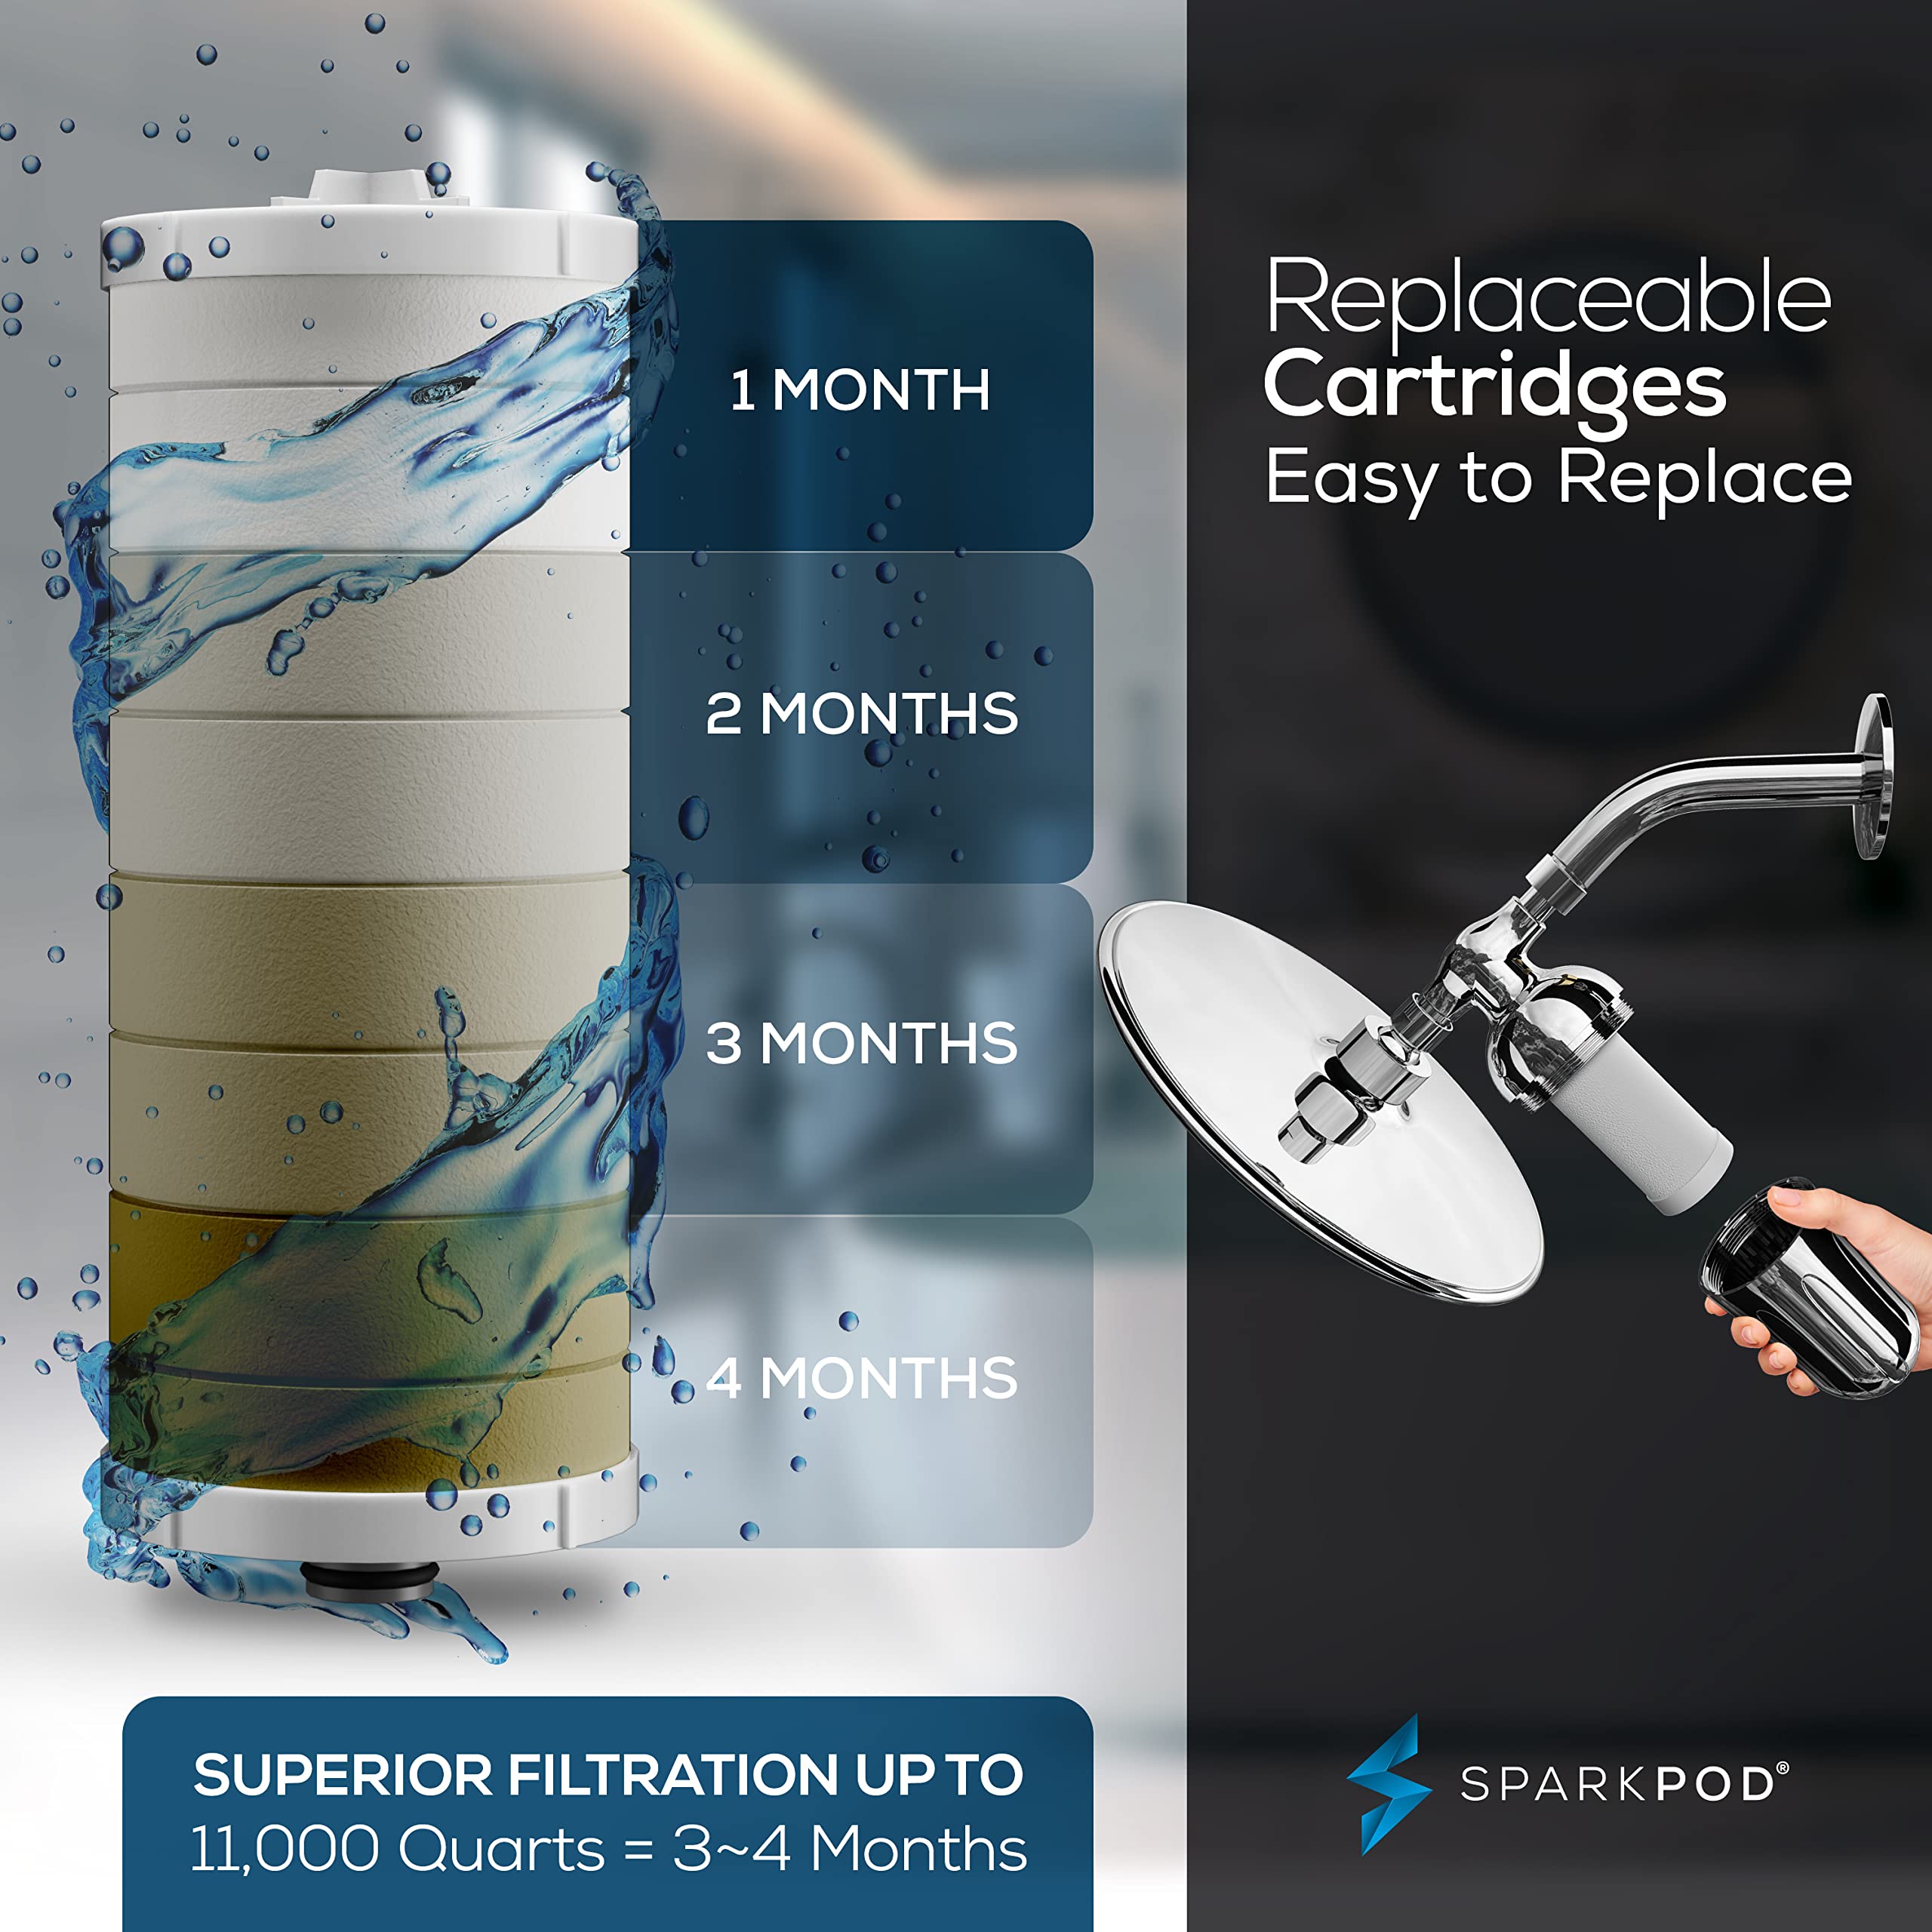 SparkPod Ultra Shower Filter Cartridge - High Output Shower Head Filter Cartridge Replacement - Unique Filtration Method Removes Up To 95% of Chlorine, Heavy Metals, Sediments & Impurities (3 Pieces)